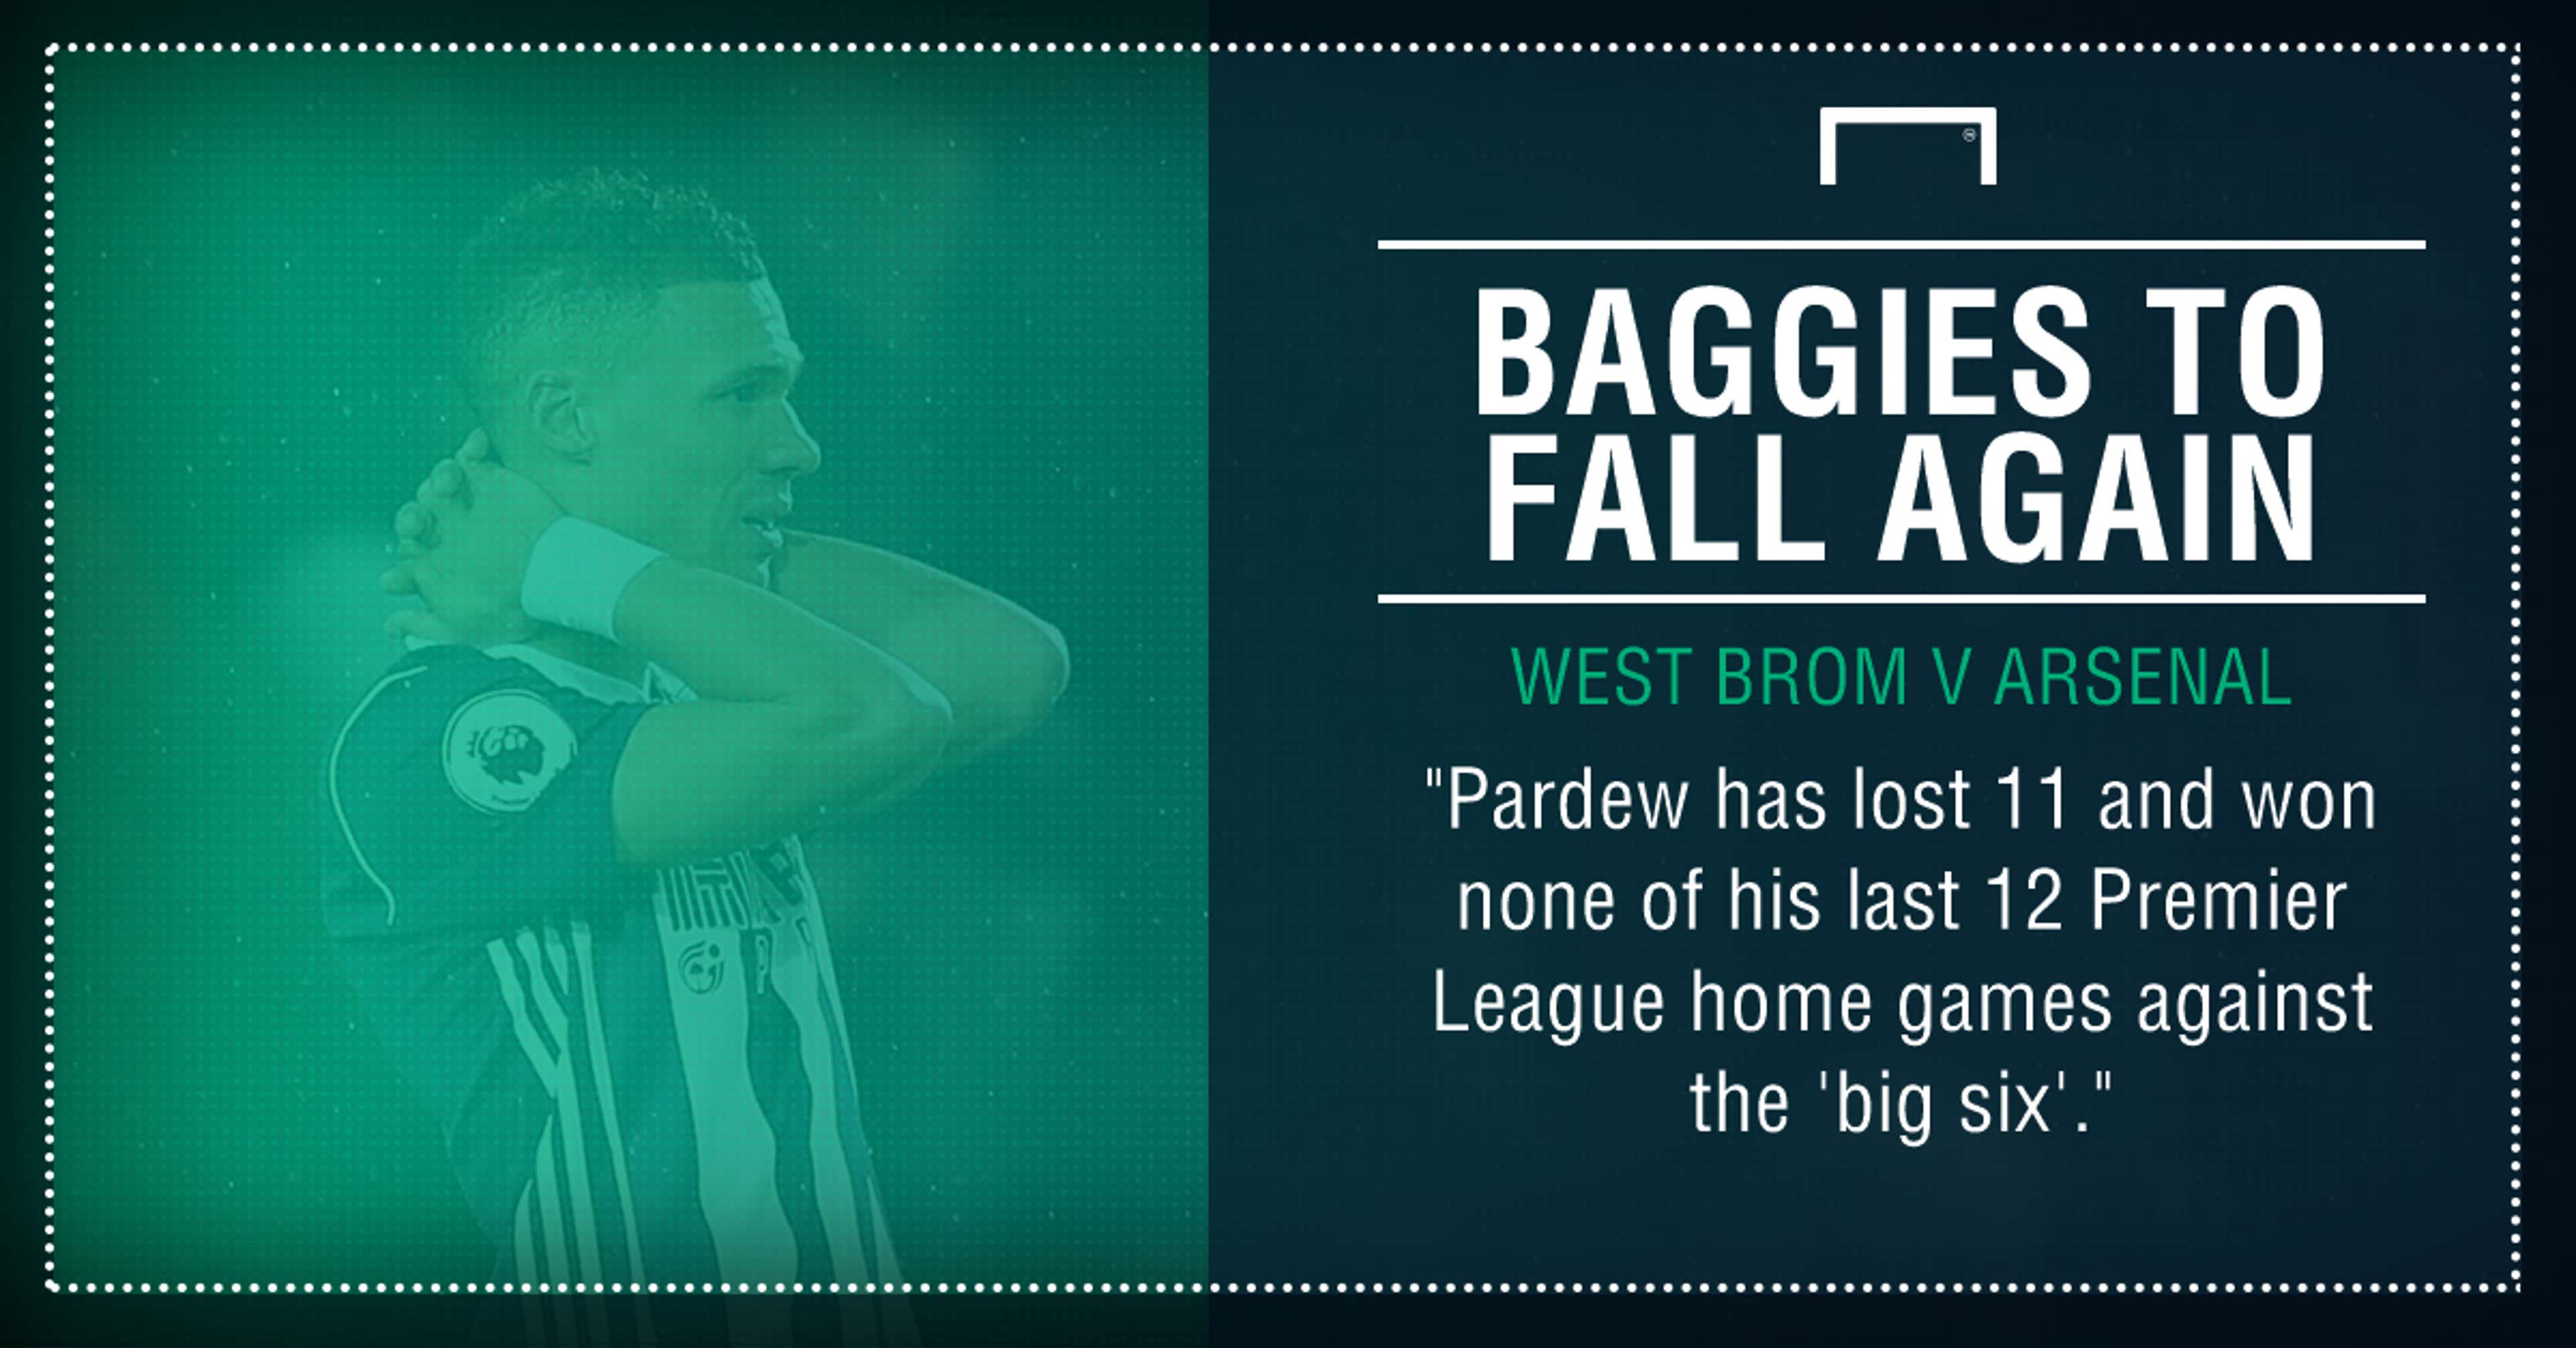 West Brom Arsenal graphic